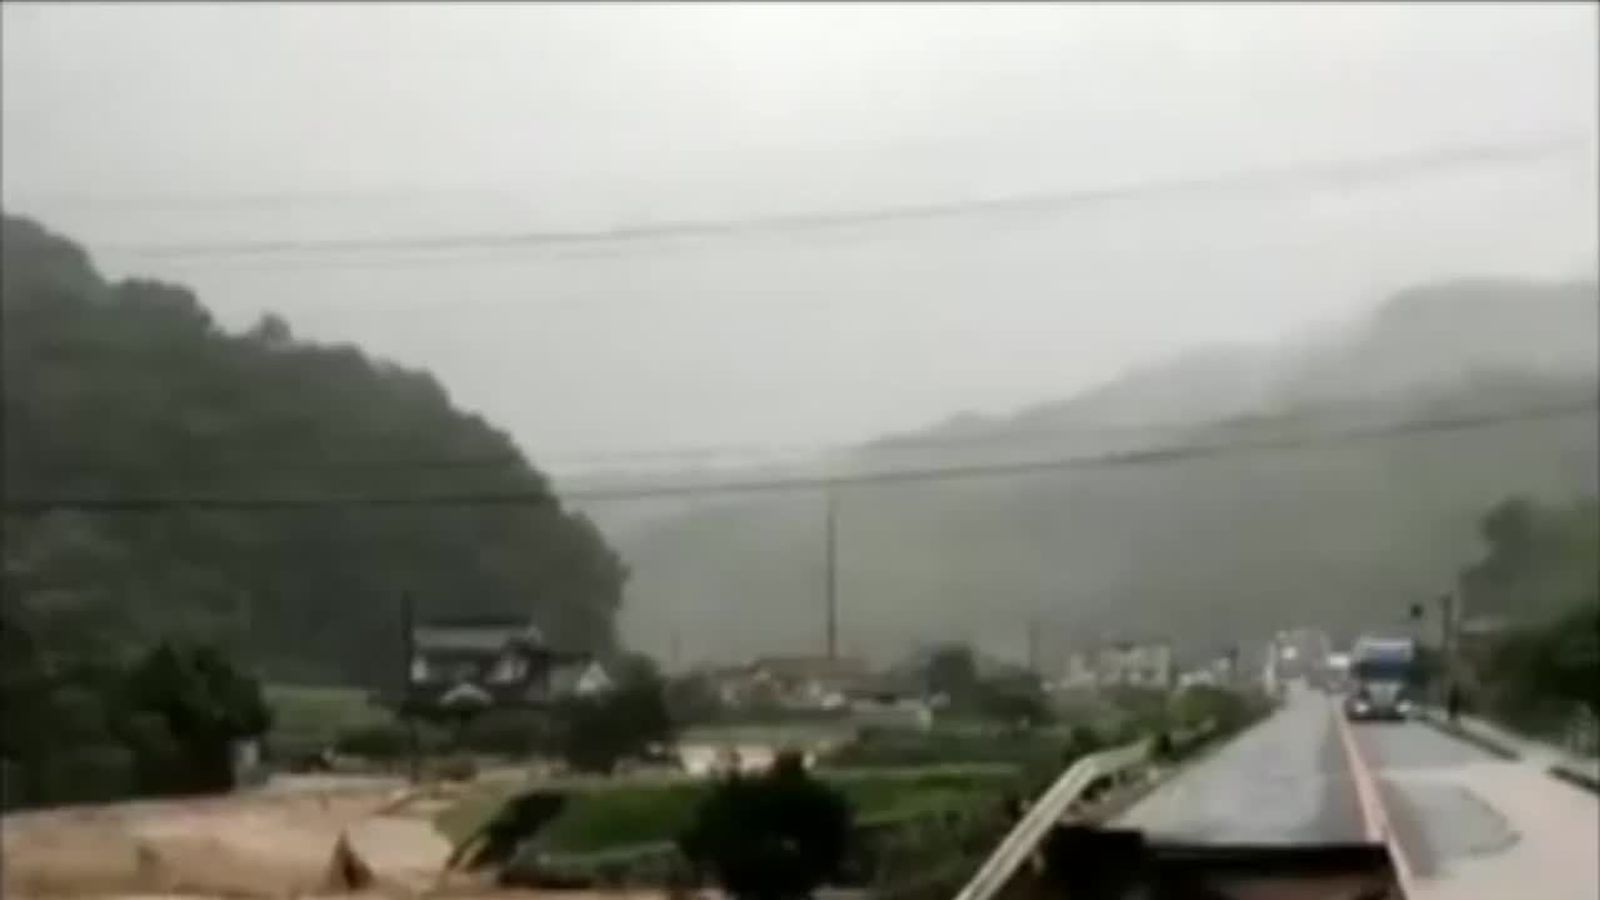 Roads collapse in Japan amid heavy flooding | News UK Video News | Sky News